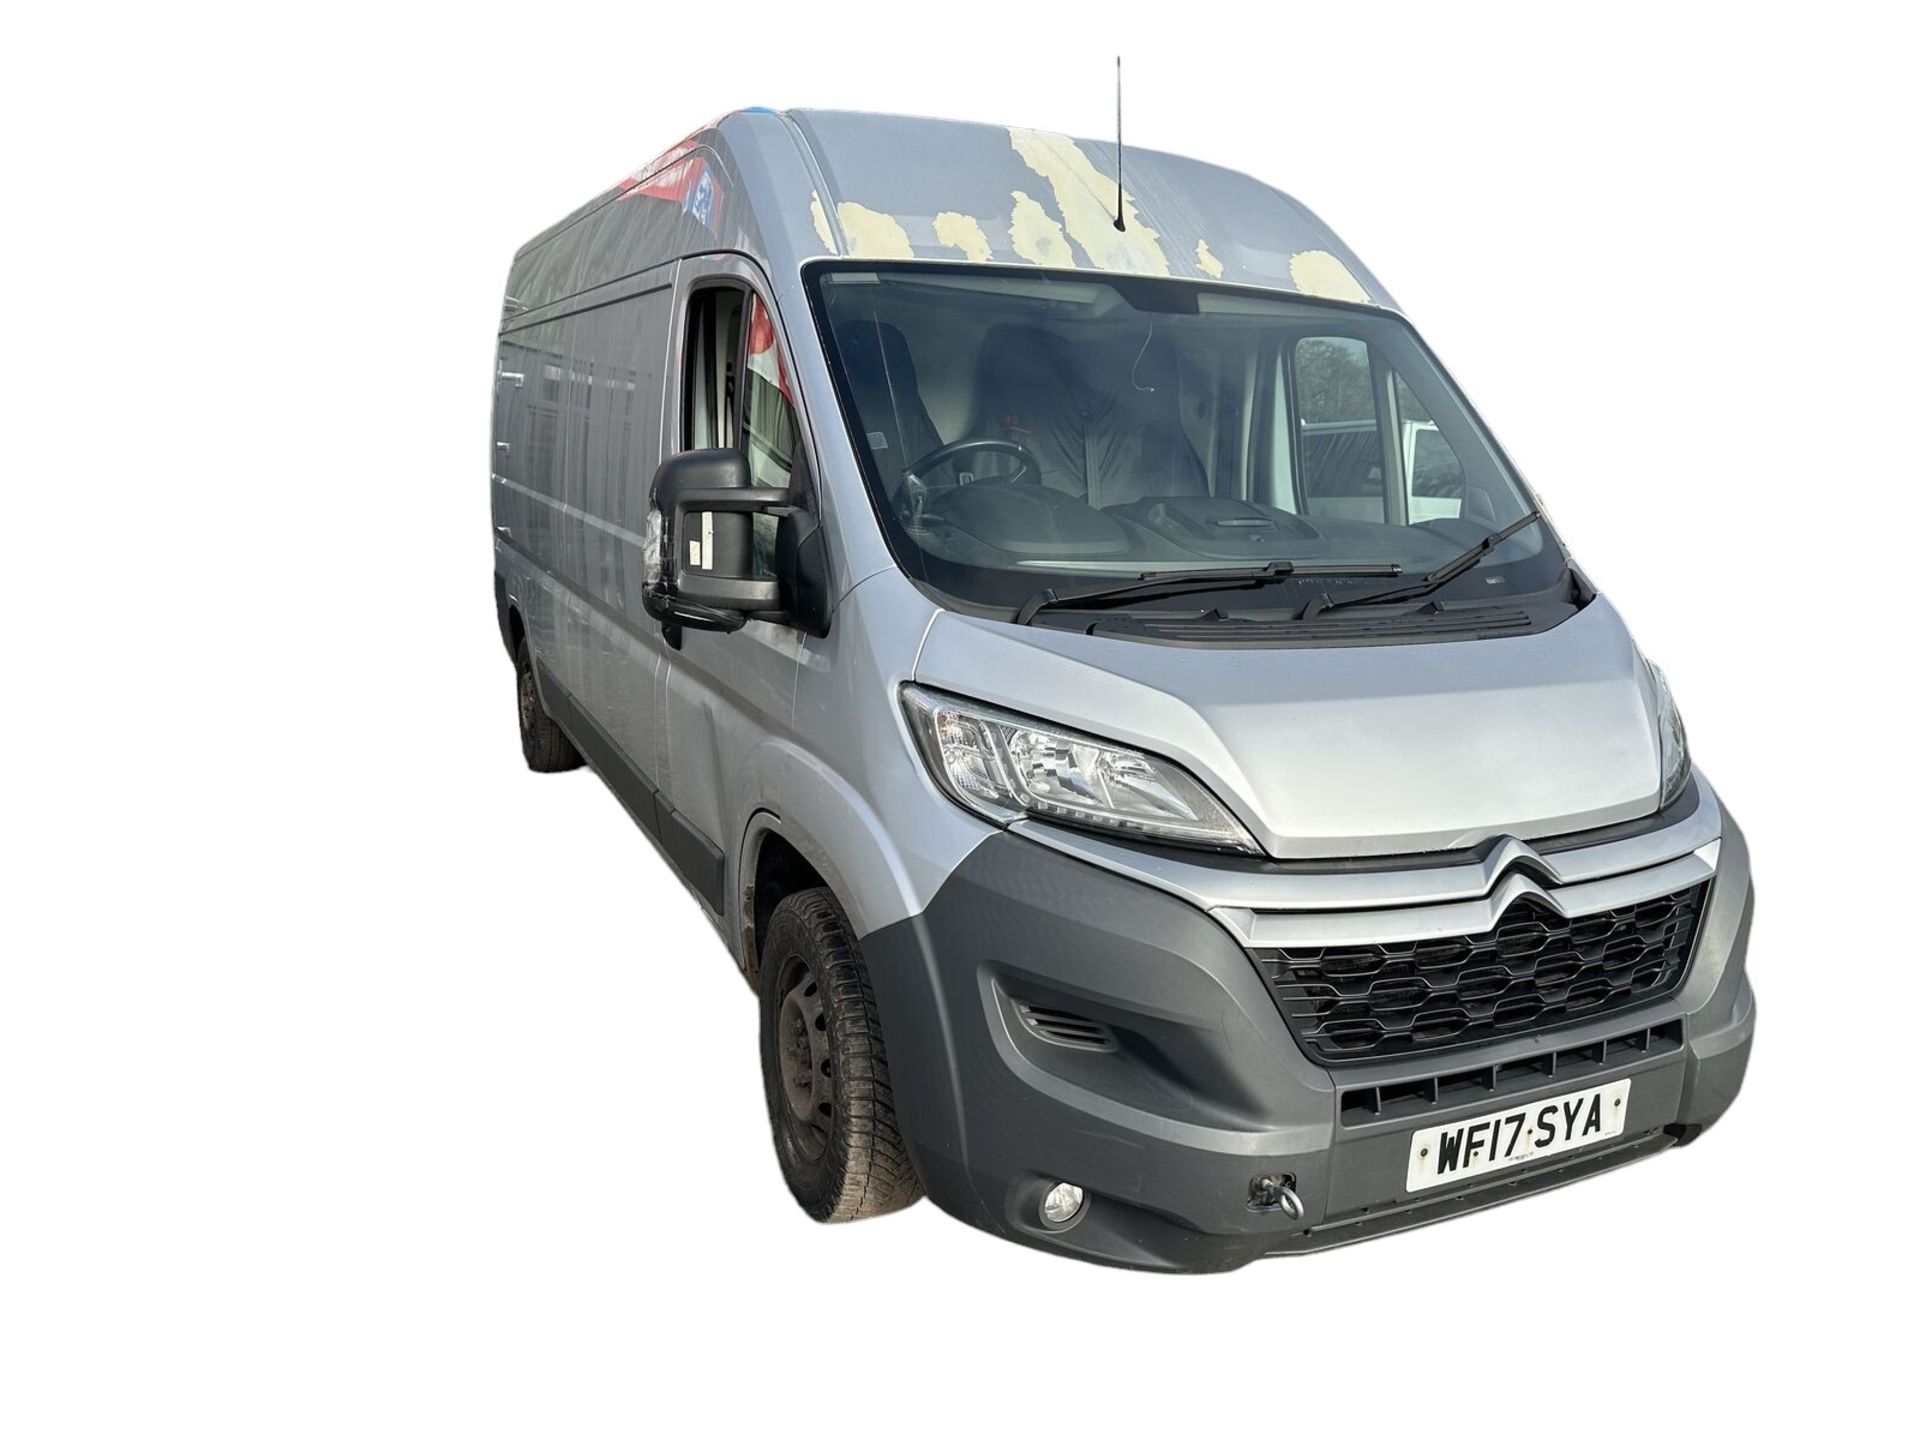 PART OUT POTENTIAL: 2017 CITROEN RELAY - SEIZED ENGINE, CLEAN BODY >>--NO VAT ON HAMMER--<<